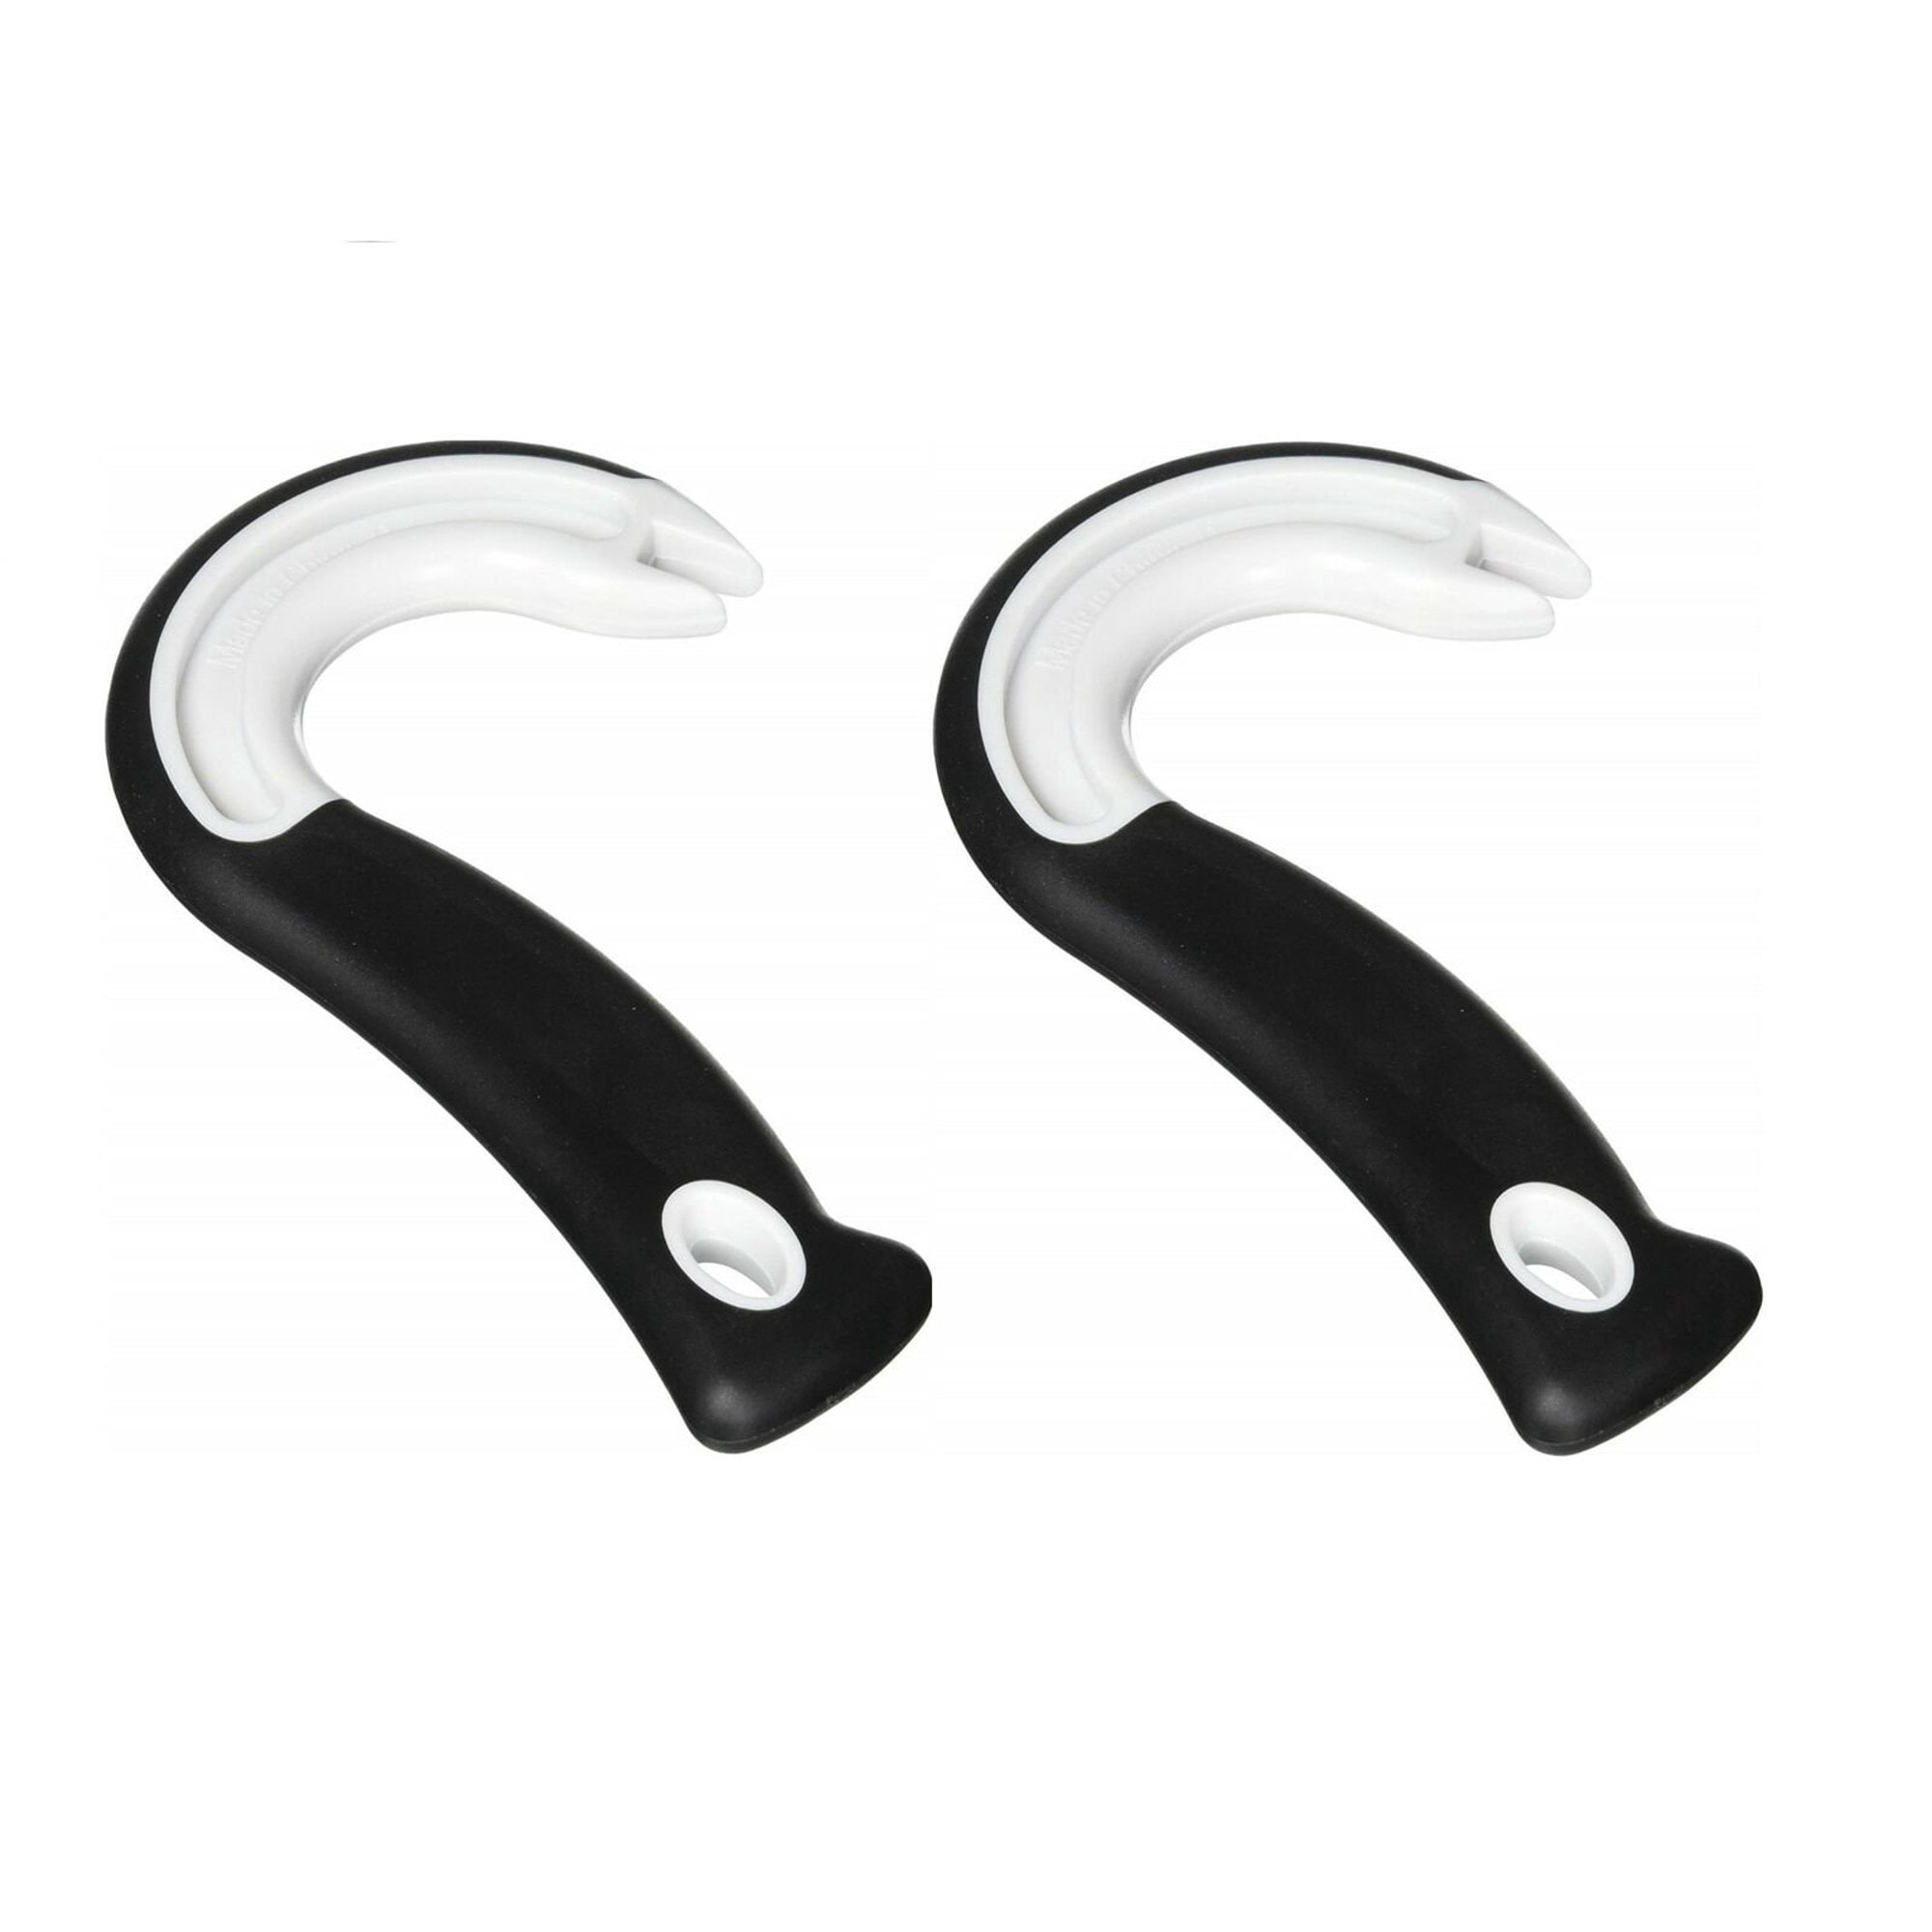 2 Easy Safe Ring Pull CAN OPENER Protects Nails Arthritis Hands